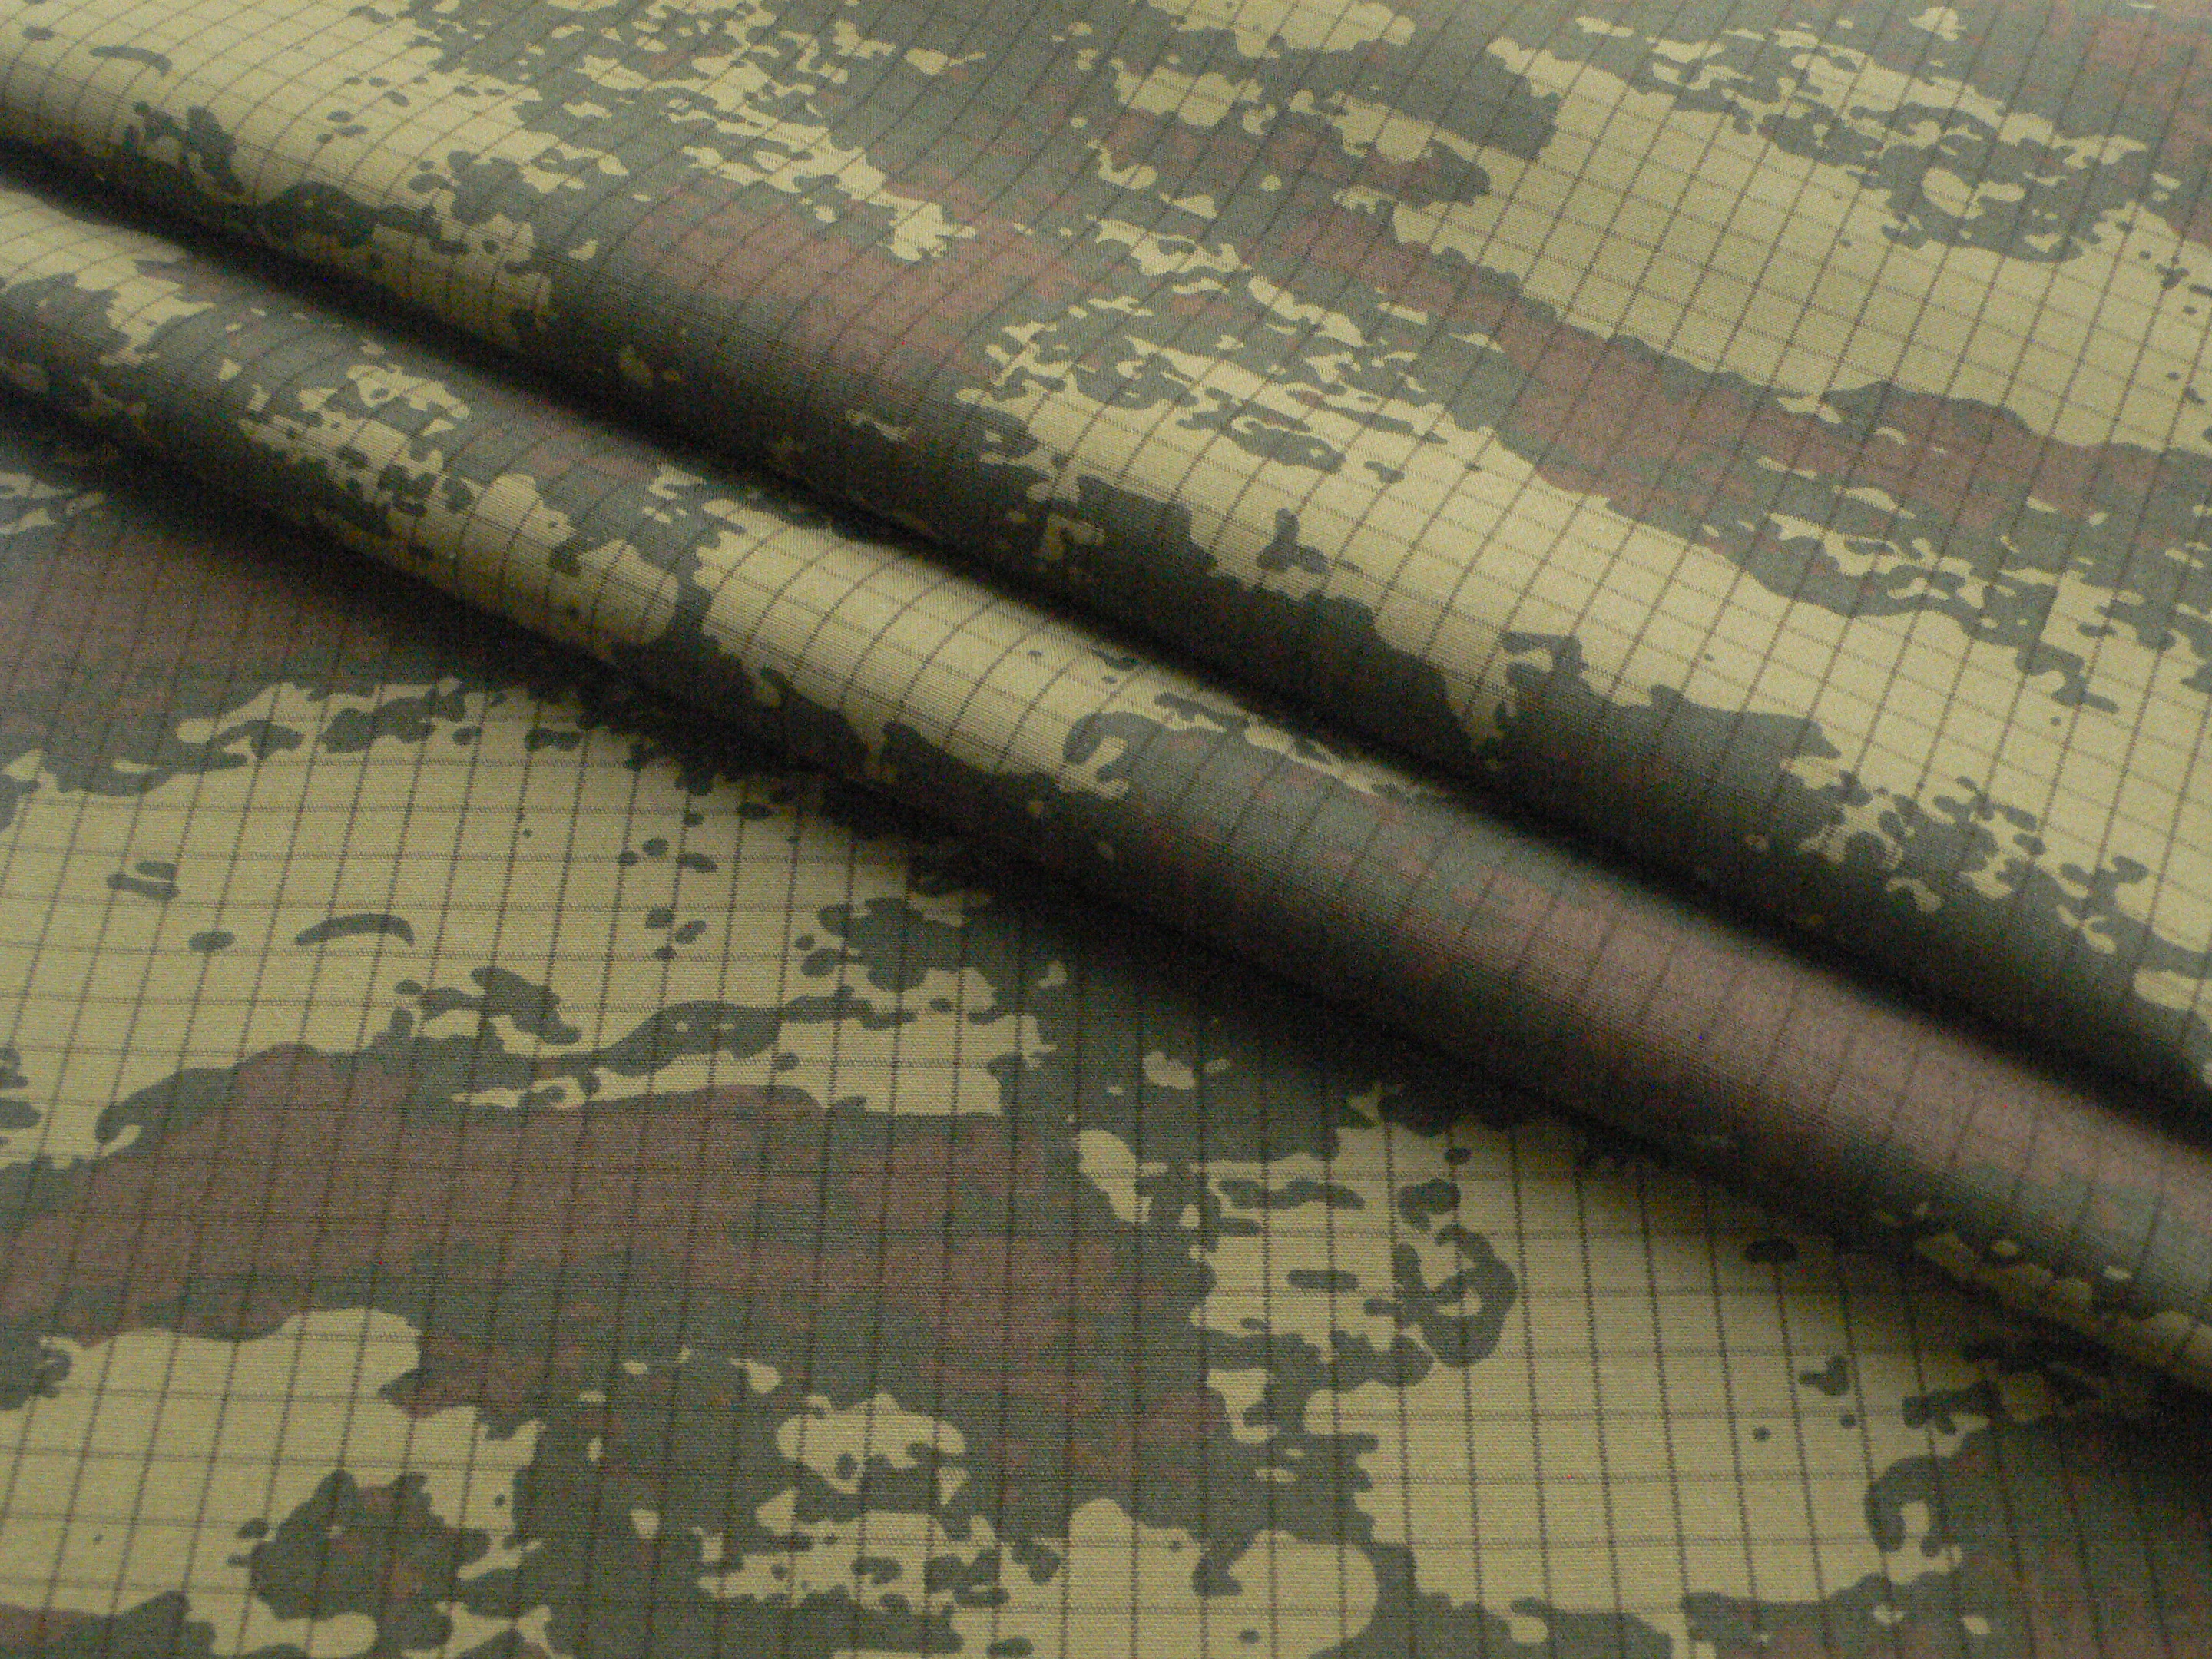 High Strength CVC Military Camouflage Fabric for Summer